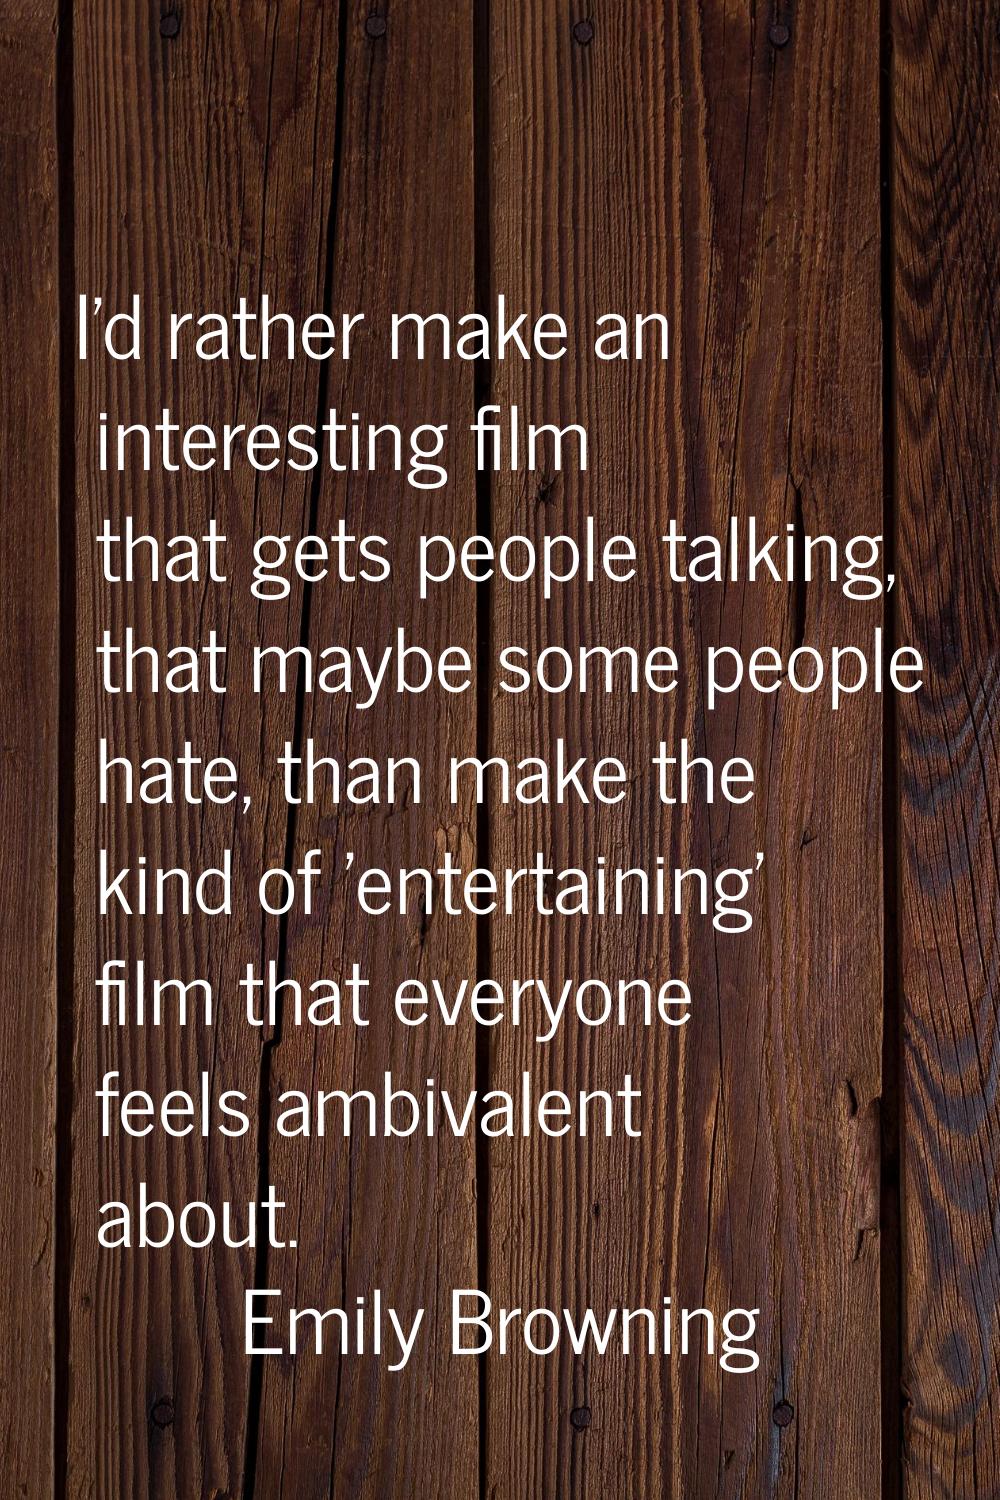 I'd rather make an interesting film that gets people talking, that maybe some people hate, than mak